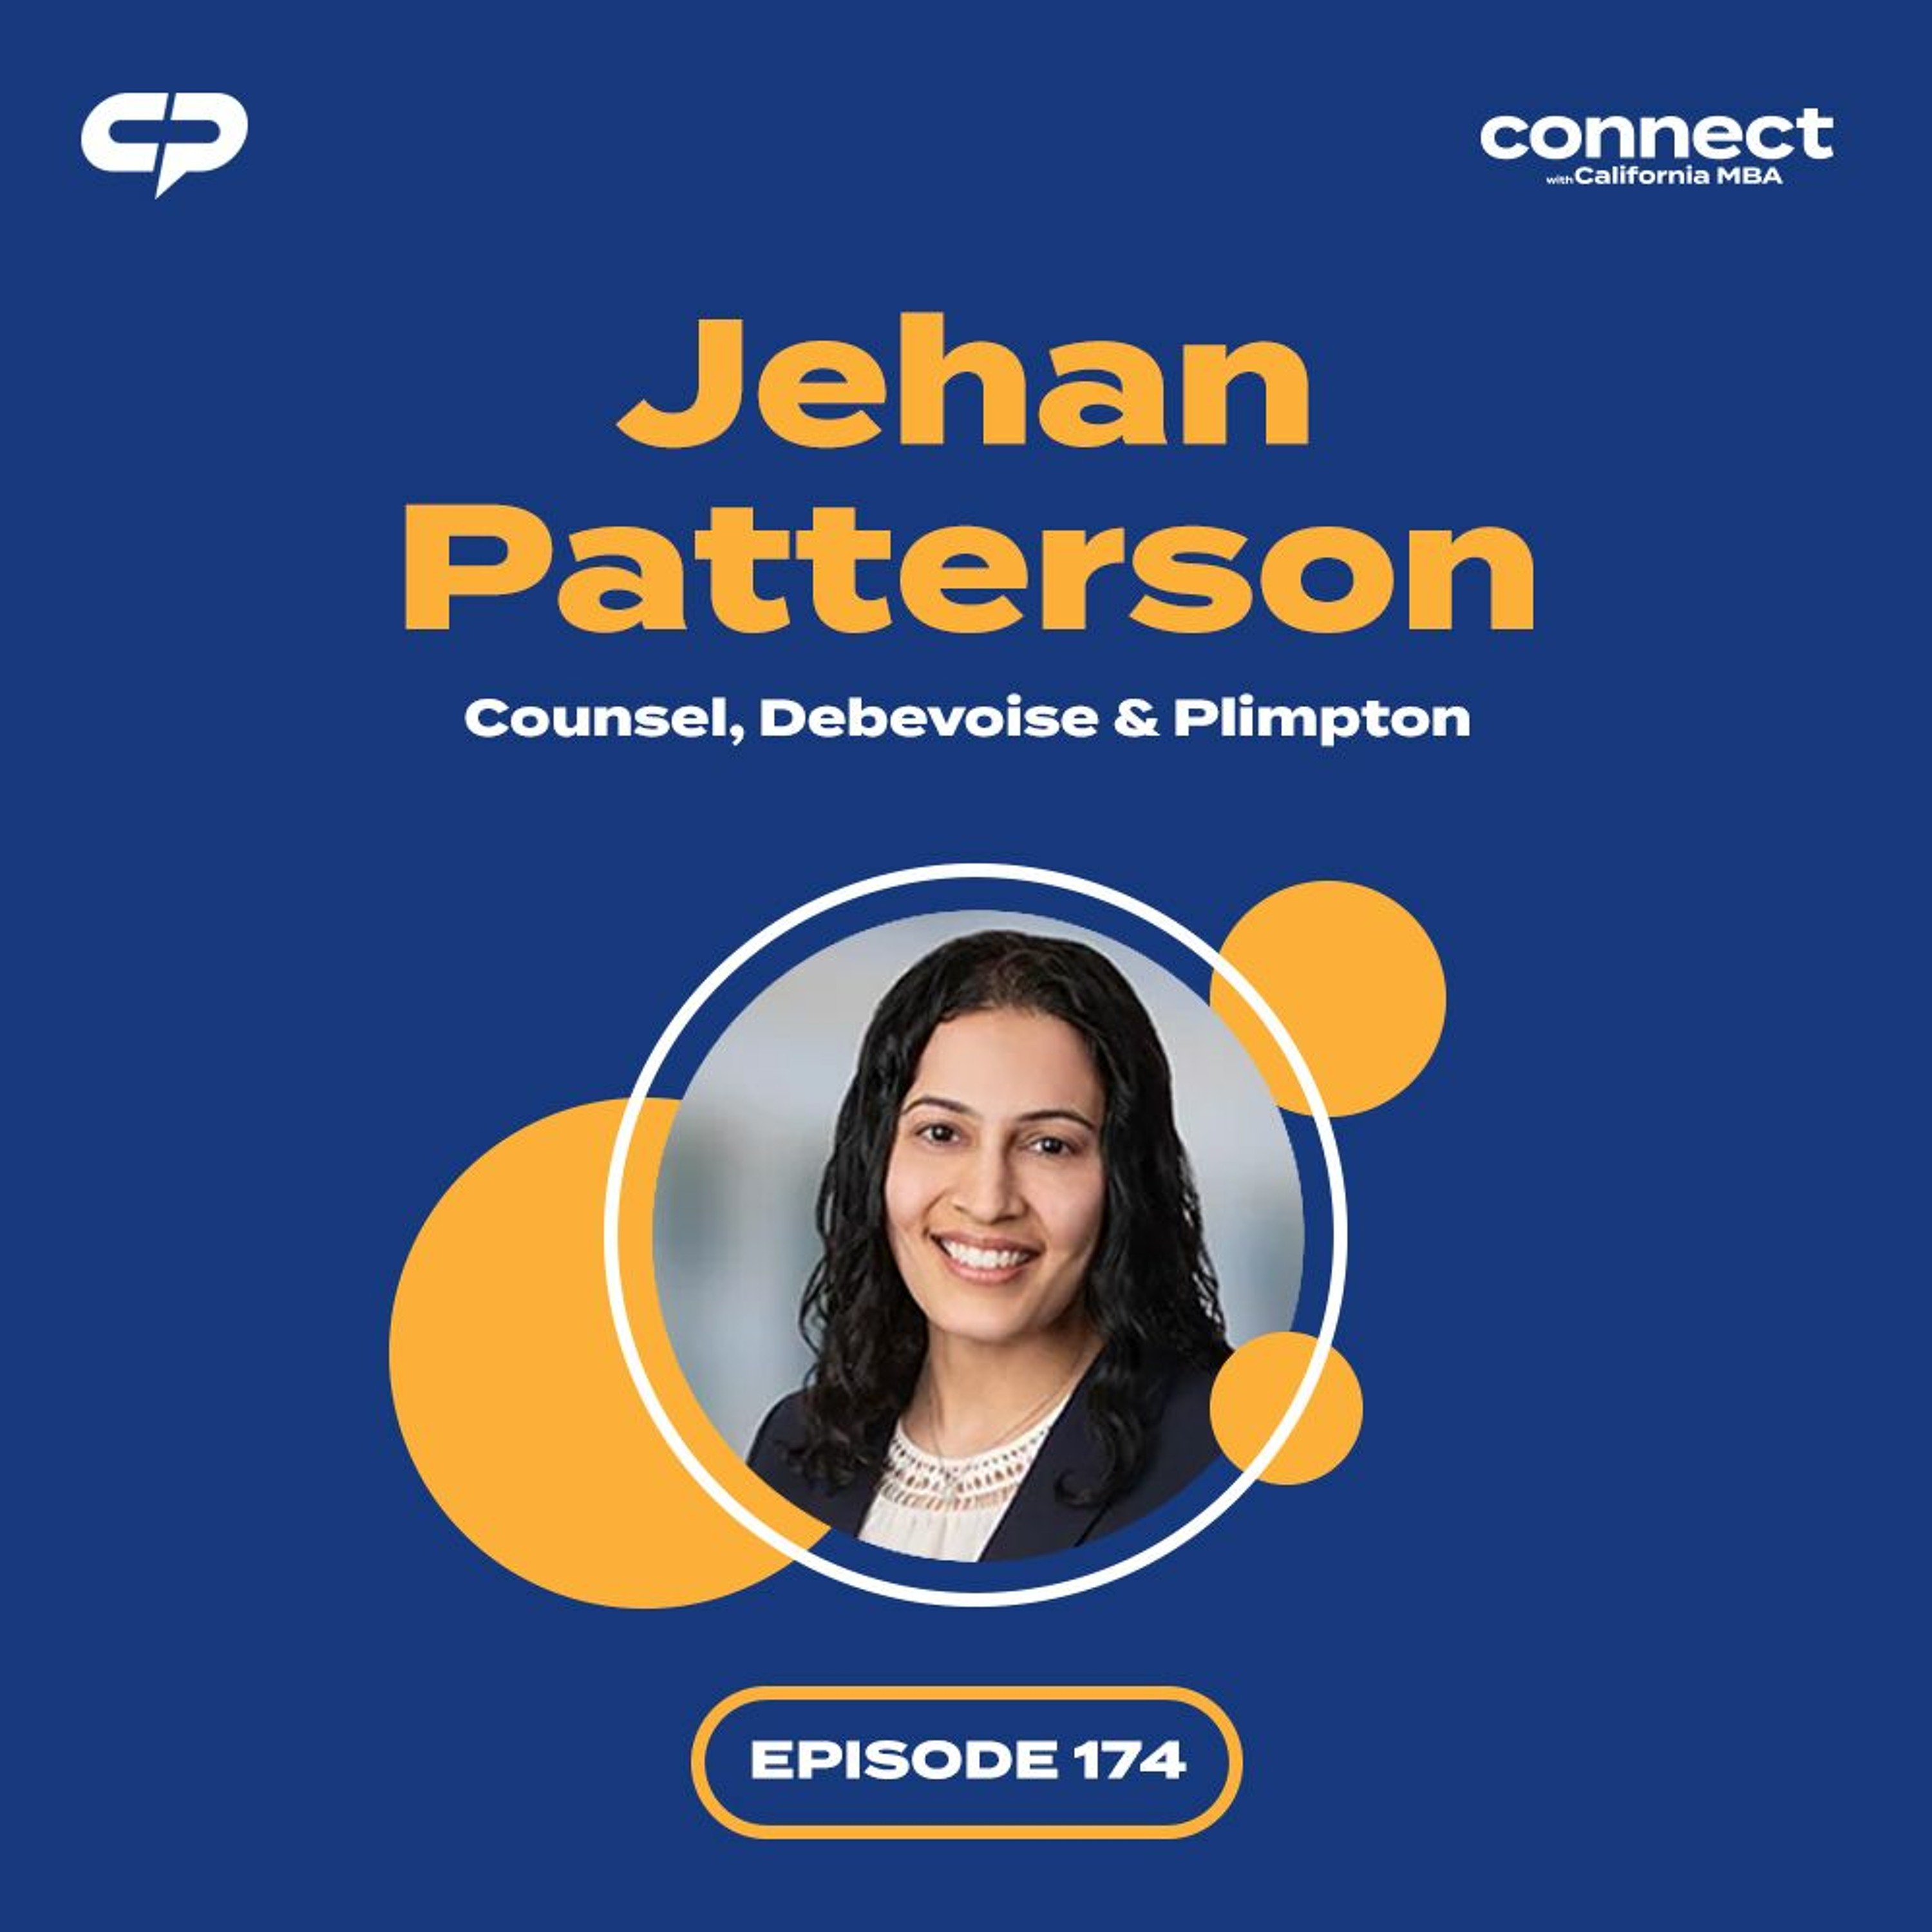 Connect with Jehan Patterson, Counsel, Debevoise & Plimpton | Episode 174